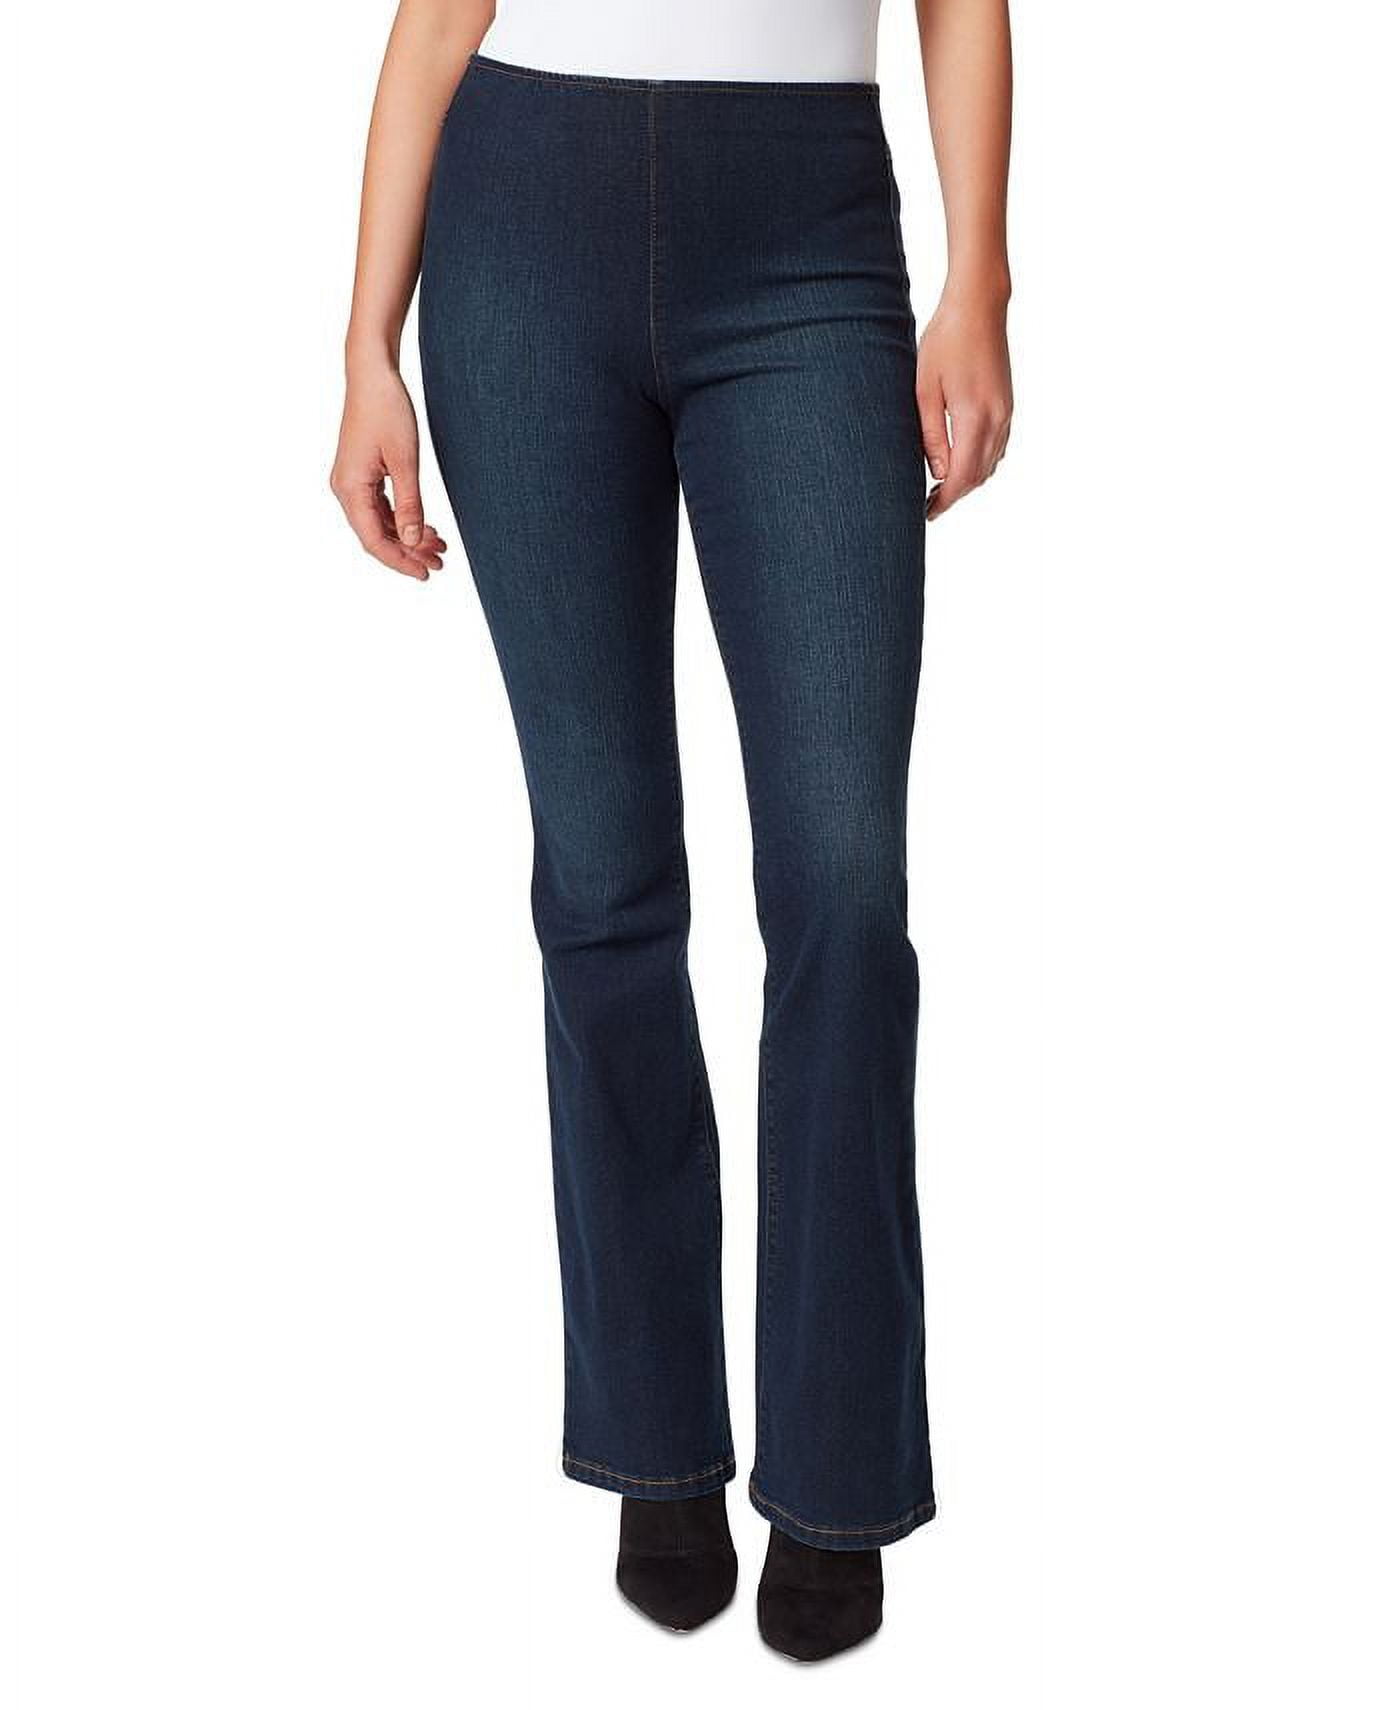 Jessica Simpson FLAWLESS Women's Pull On Flare Soft Sculpt Jeans, US 26 ...